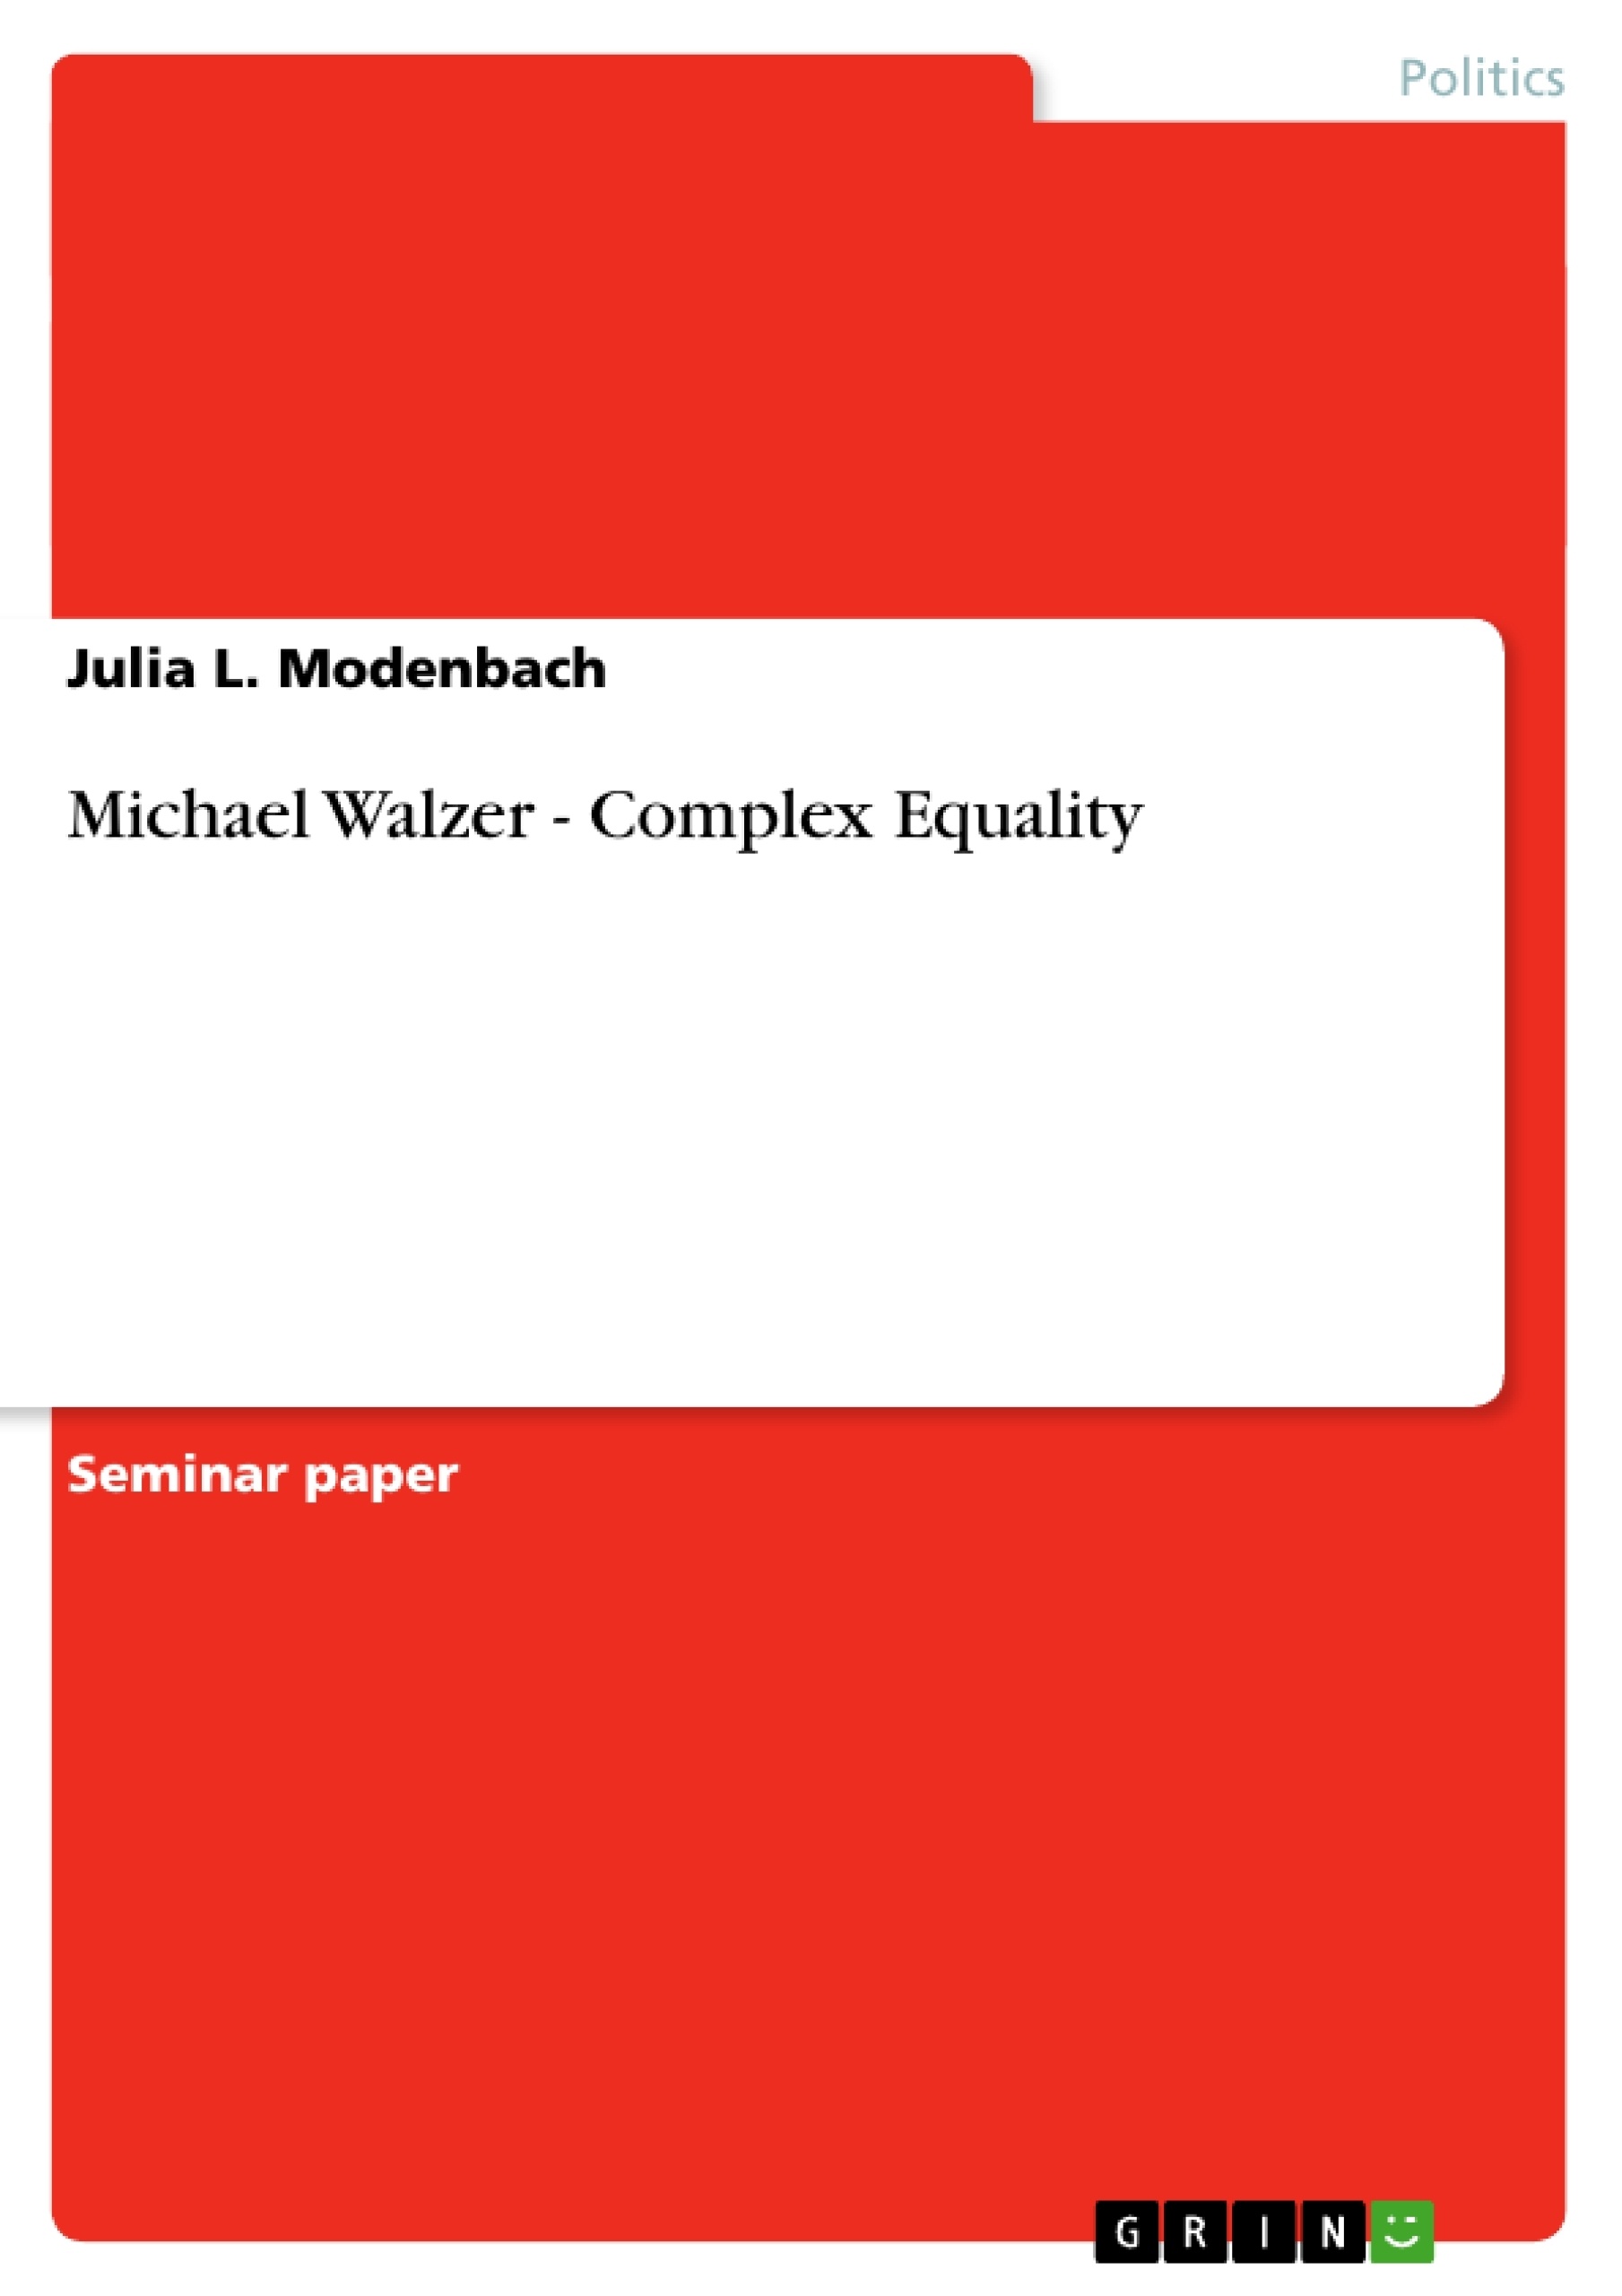 Title: Michael Walzer - Complex Equality